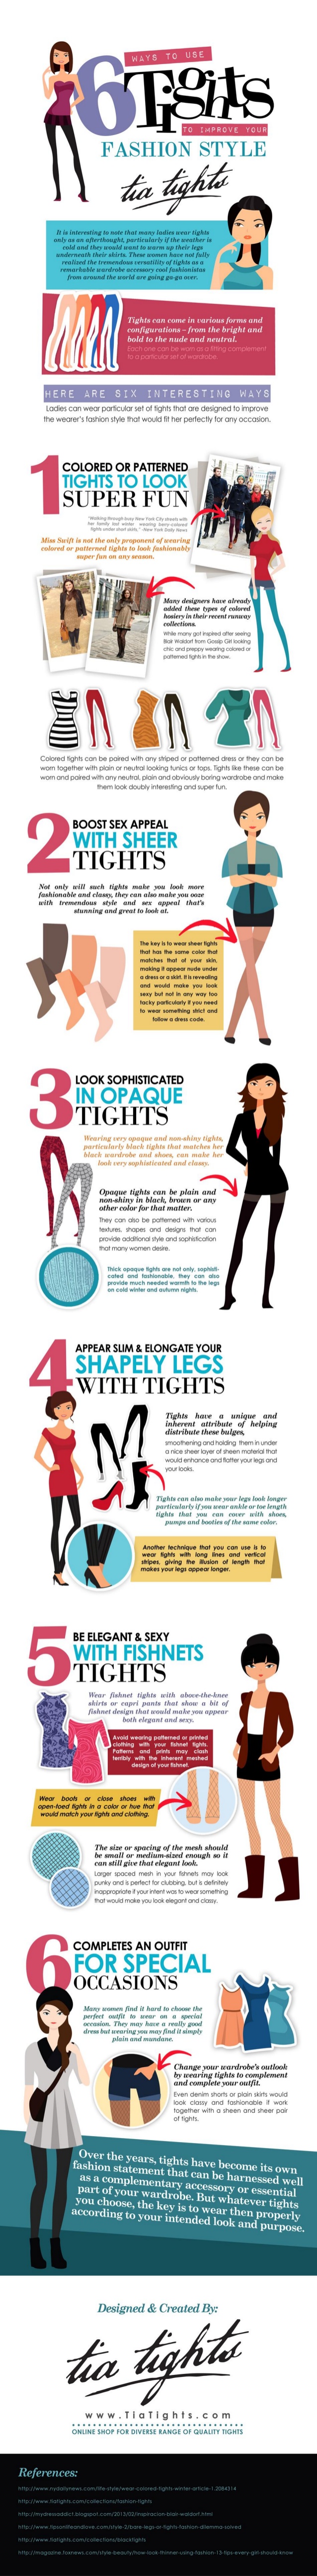 ways to use tights to improve your fashion style